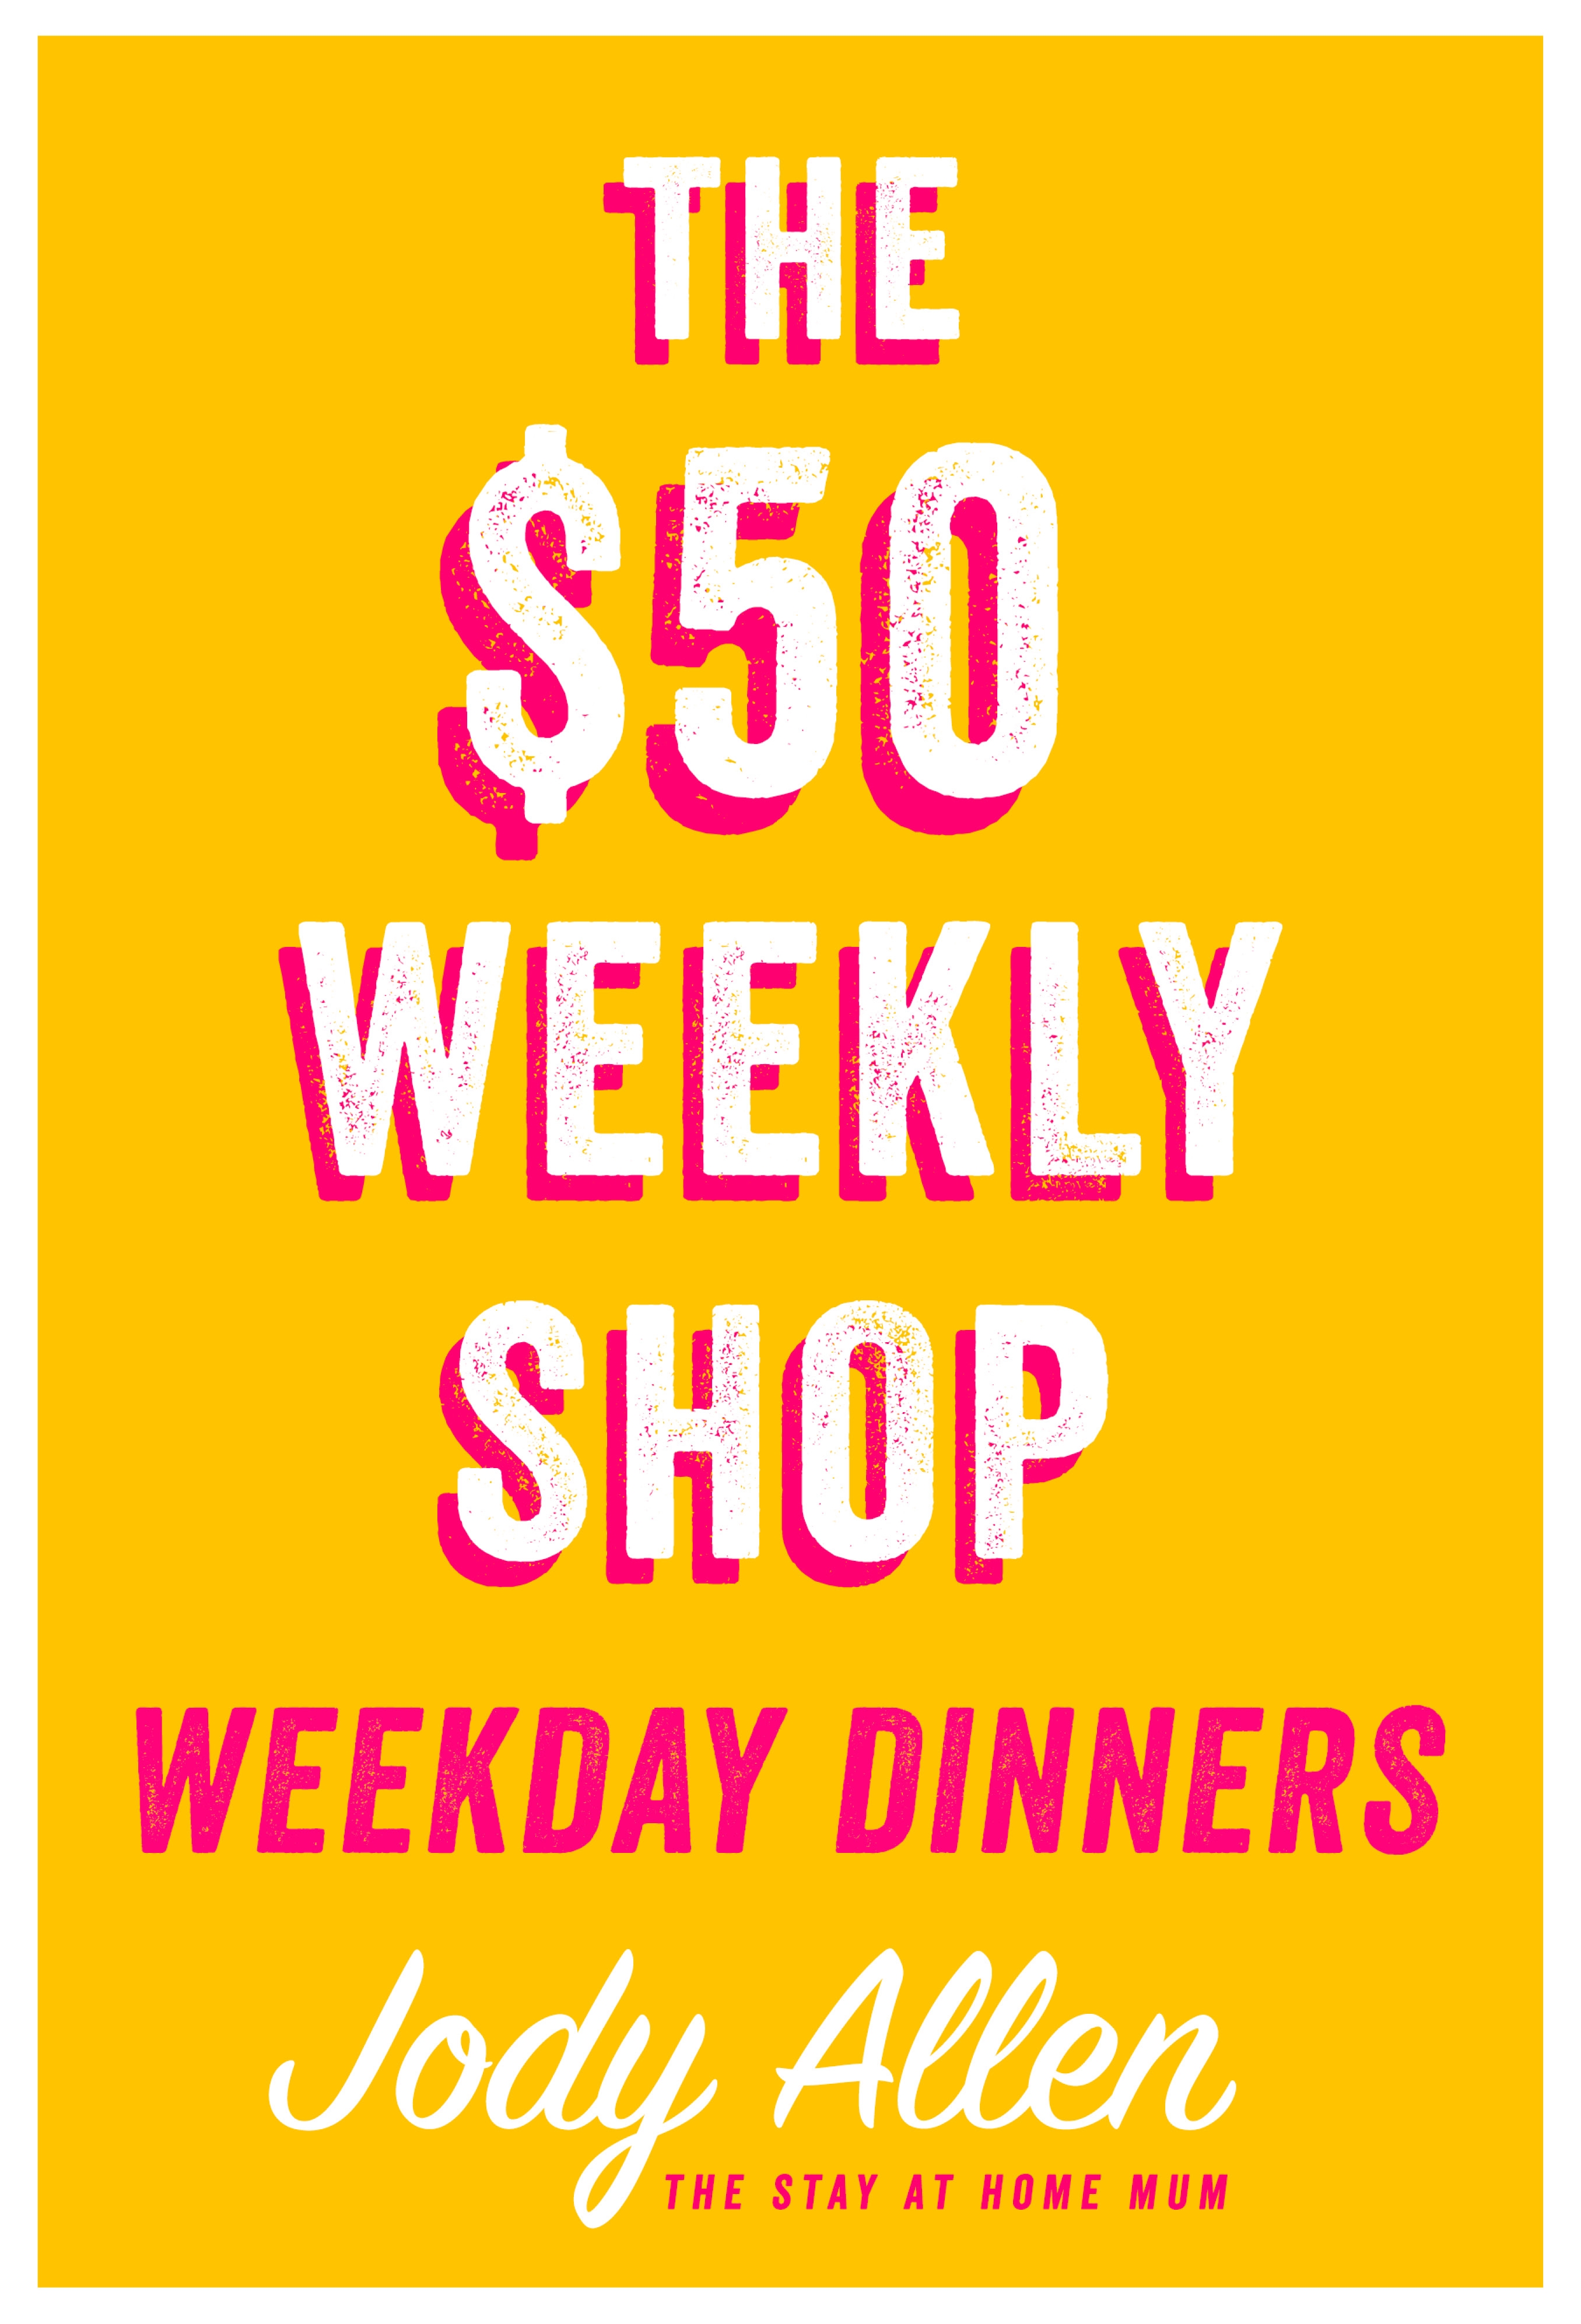 The 50 Weekly Shop Weekday Dinners By Jody Allen Penguin Books New